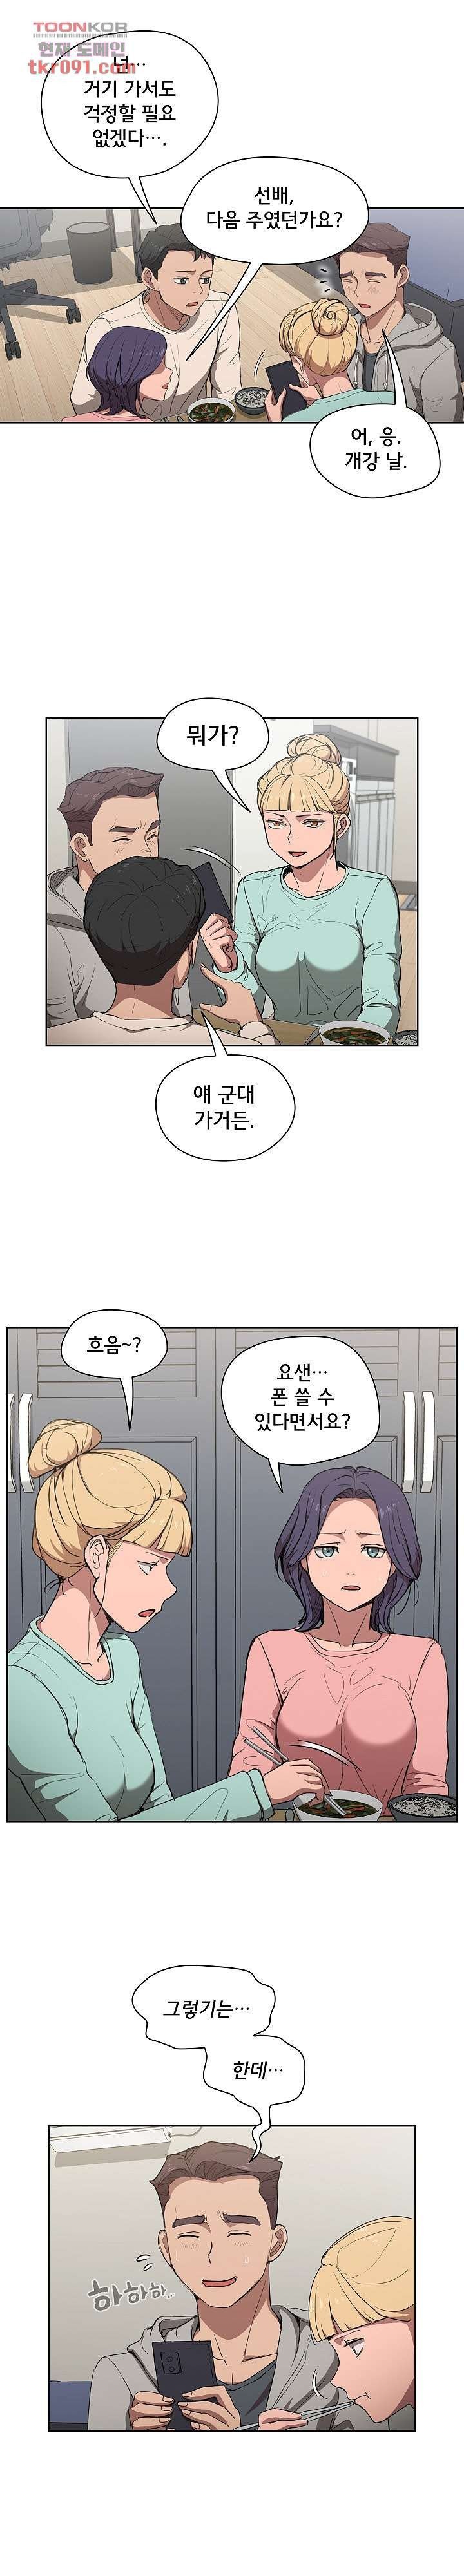 how-about-getting-lost-raw-chap-36-3